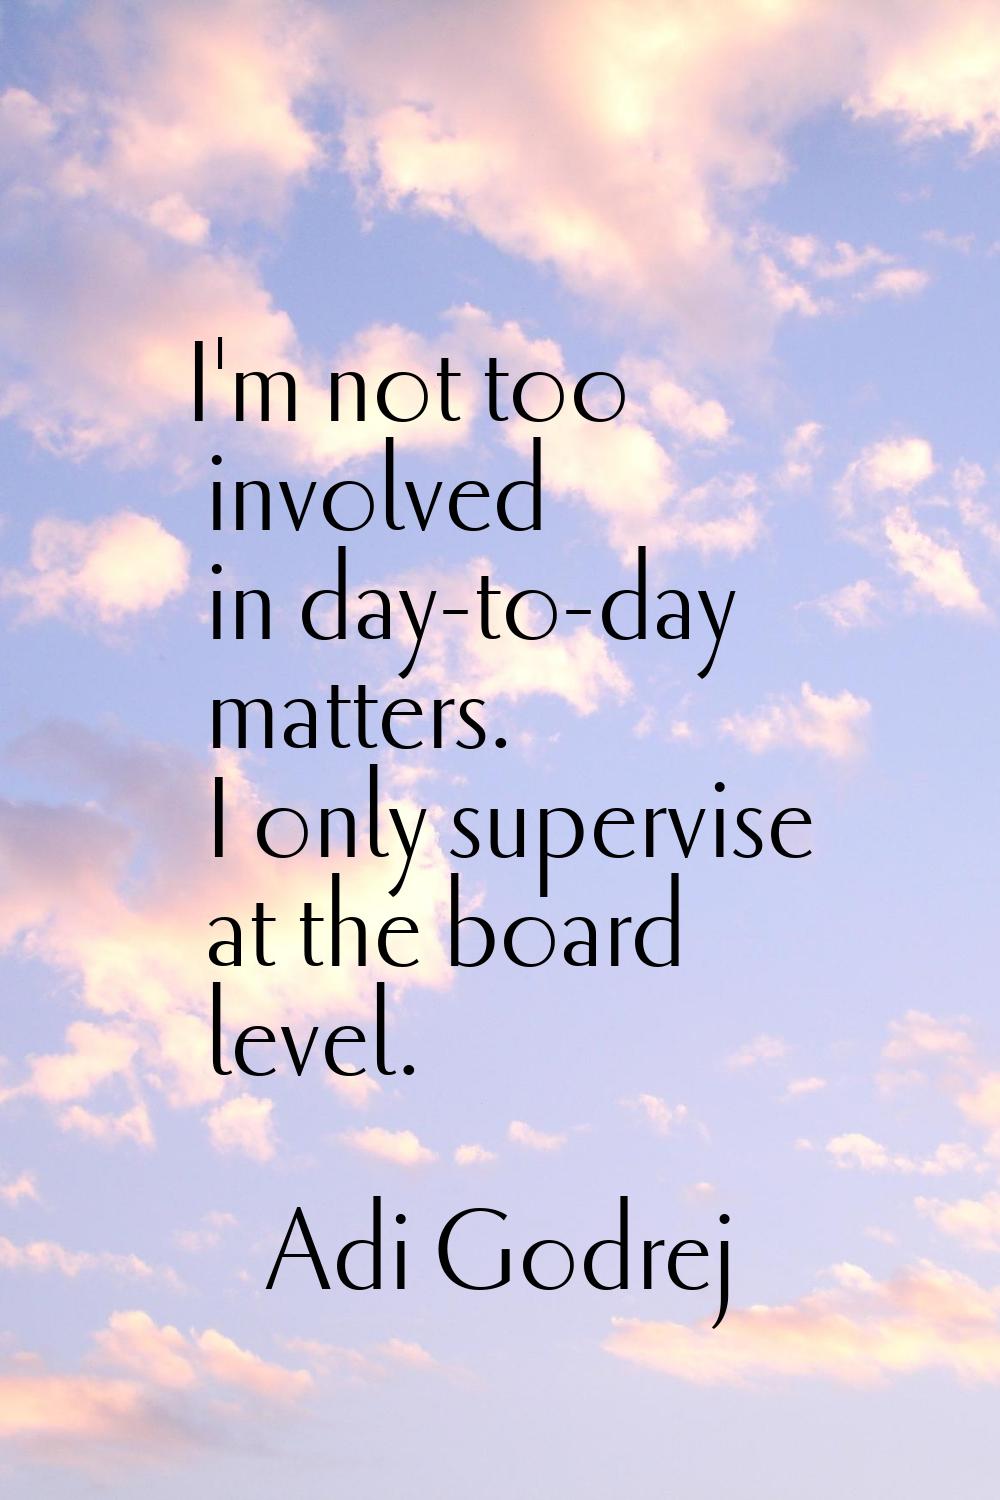 I'm not too involved in day-to-day matters. I only supervise at the board level.